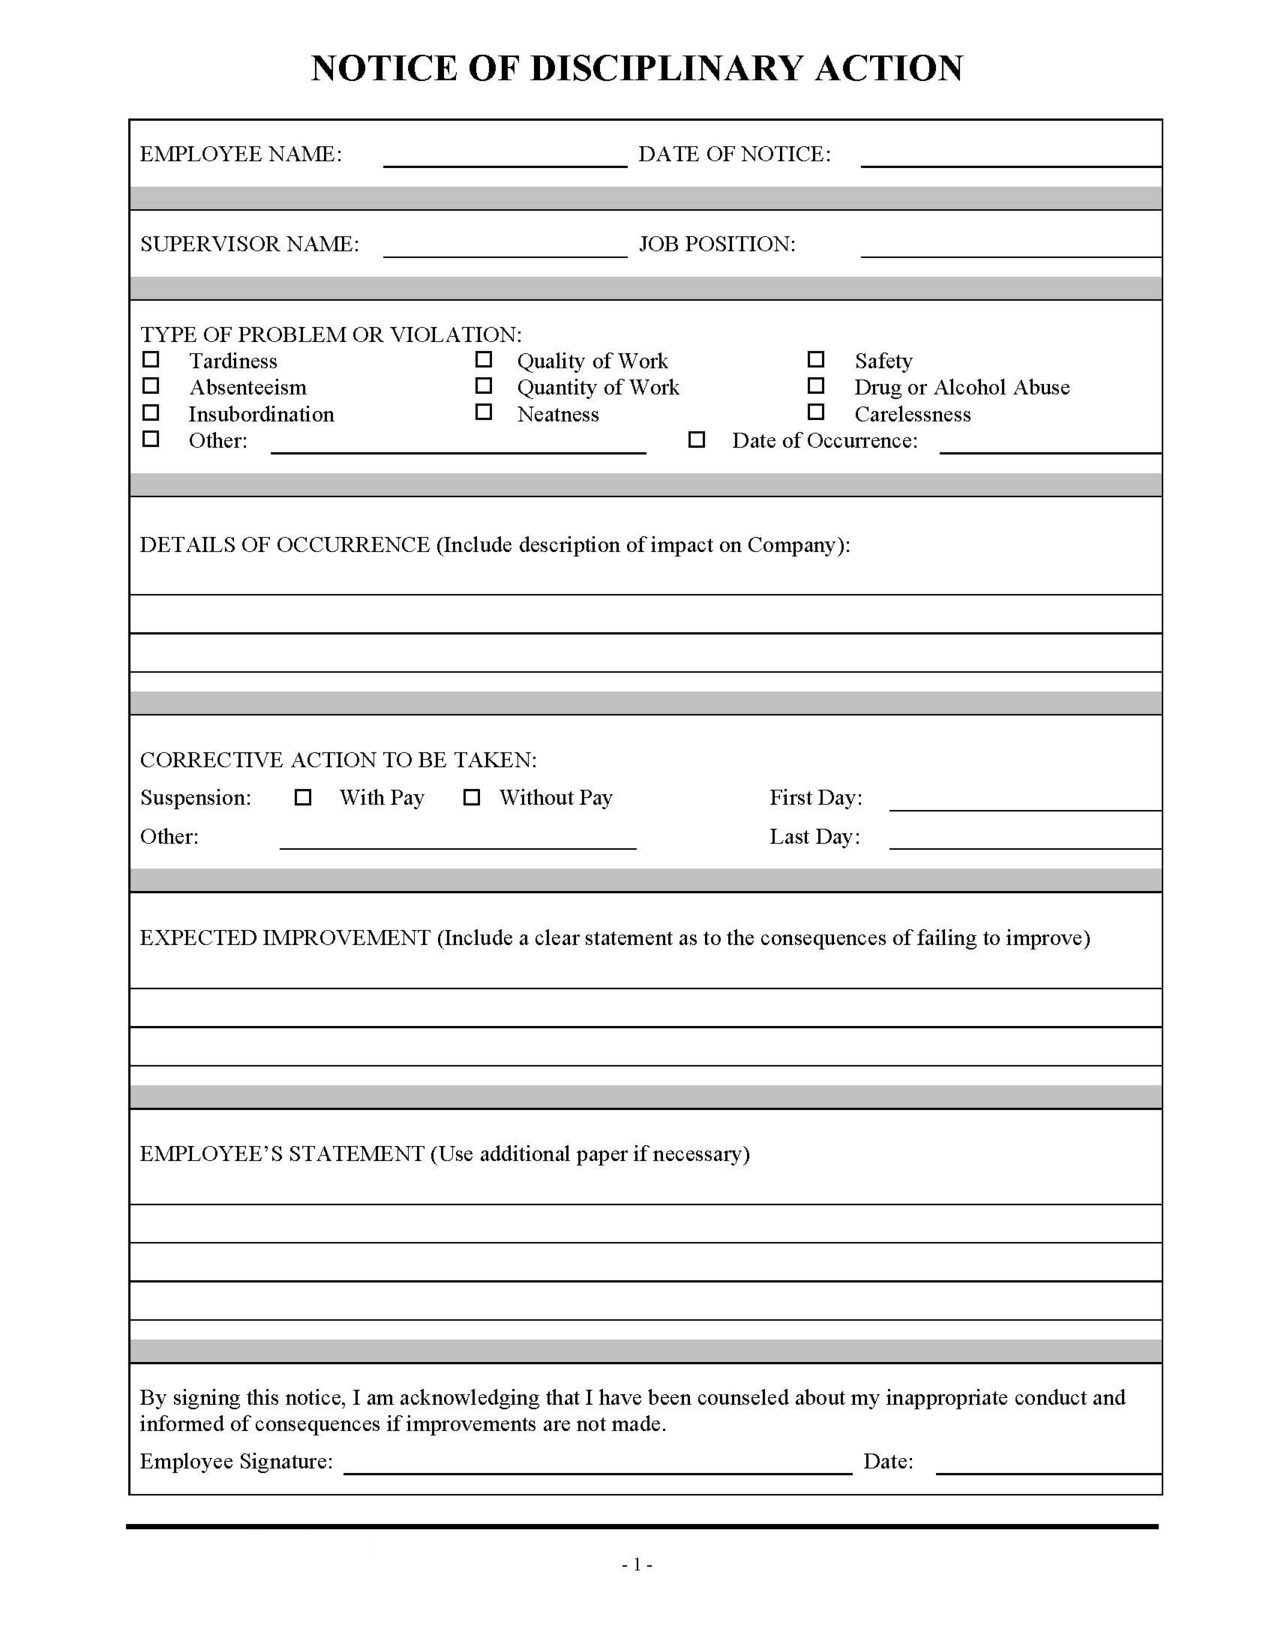 Employee Discipline Tracking Spreadsheet Inside Form Samples Employee Write Up Pdf Free Disciplinary Template Forms